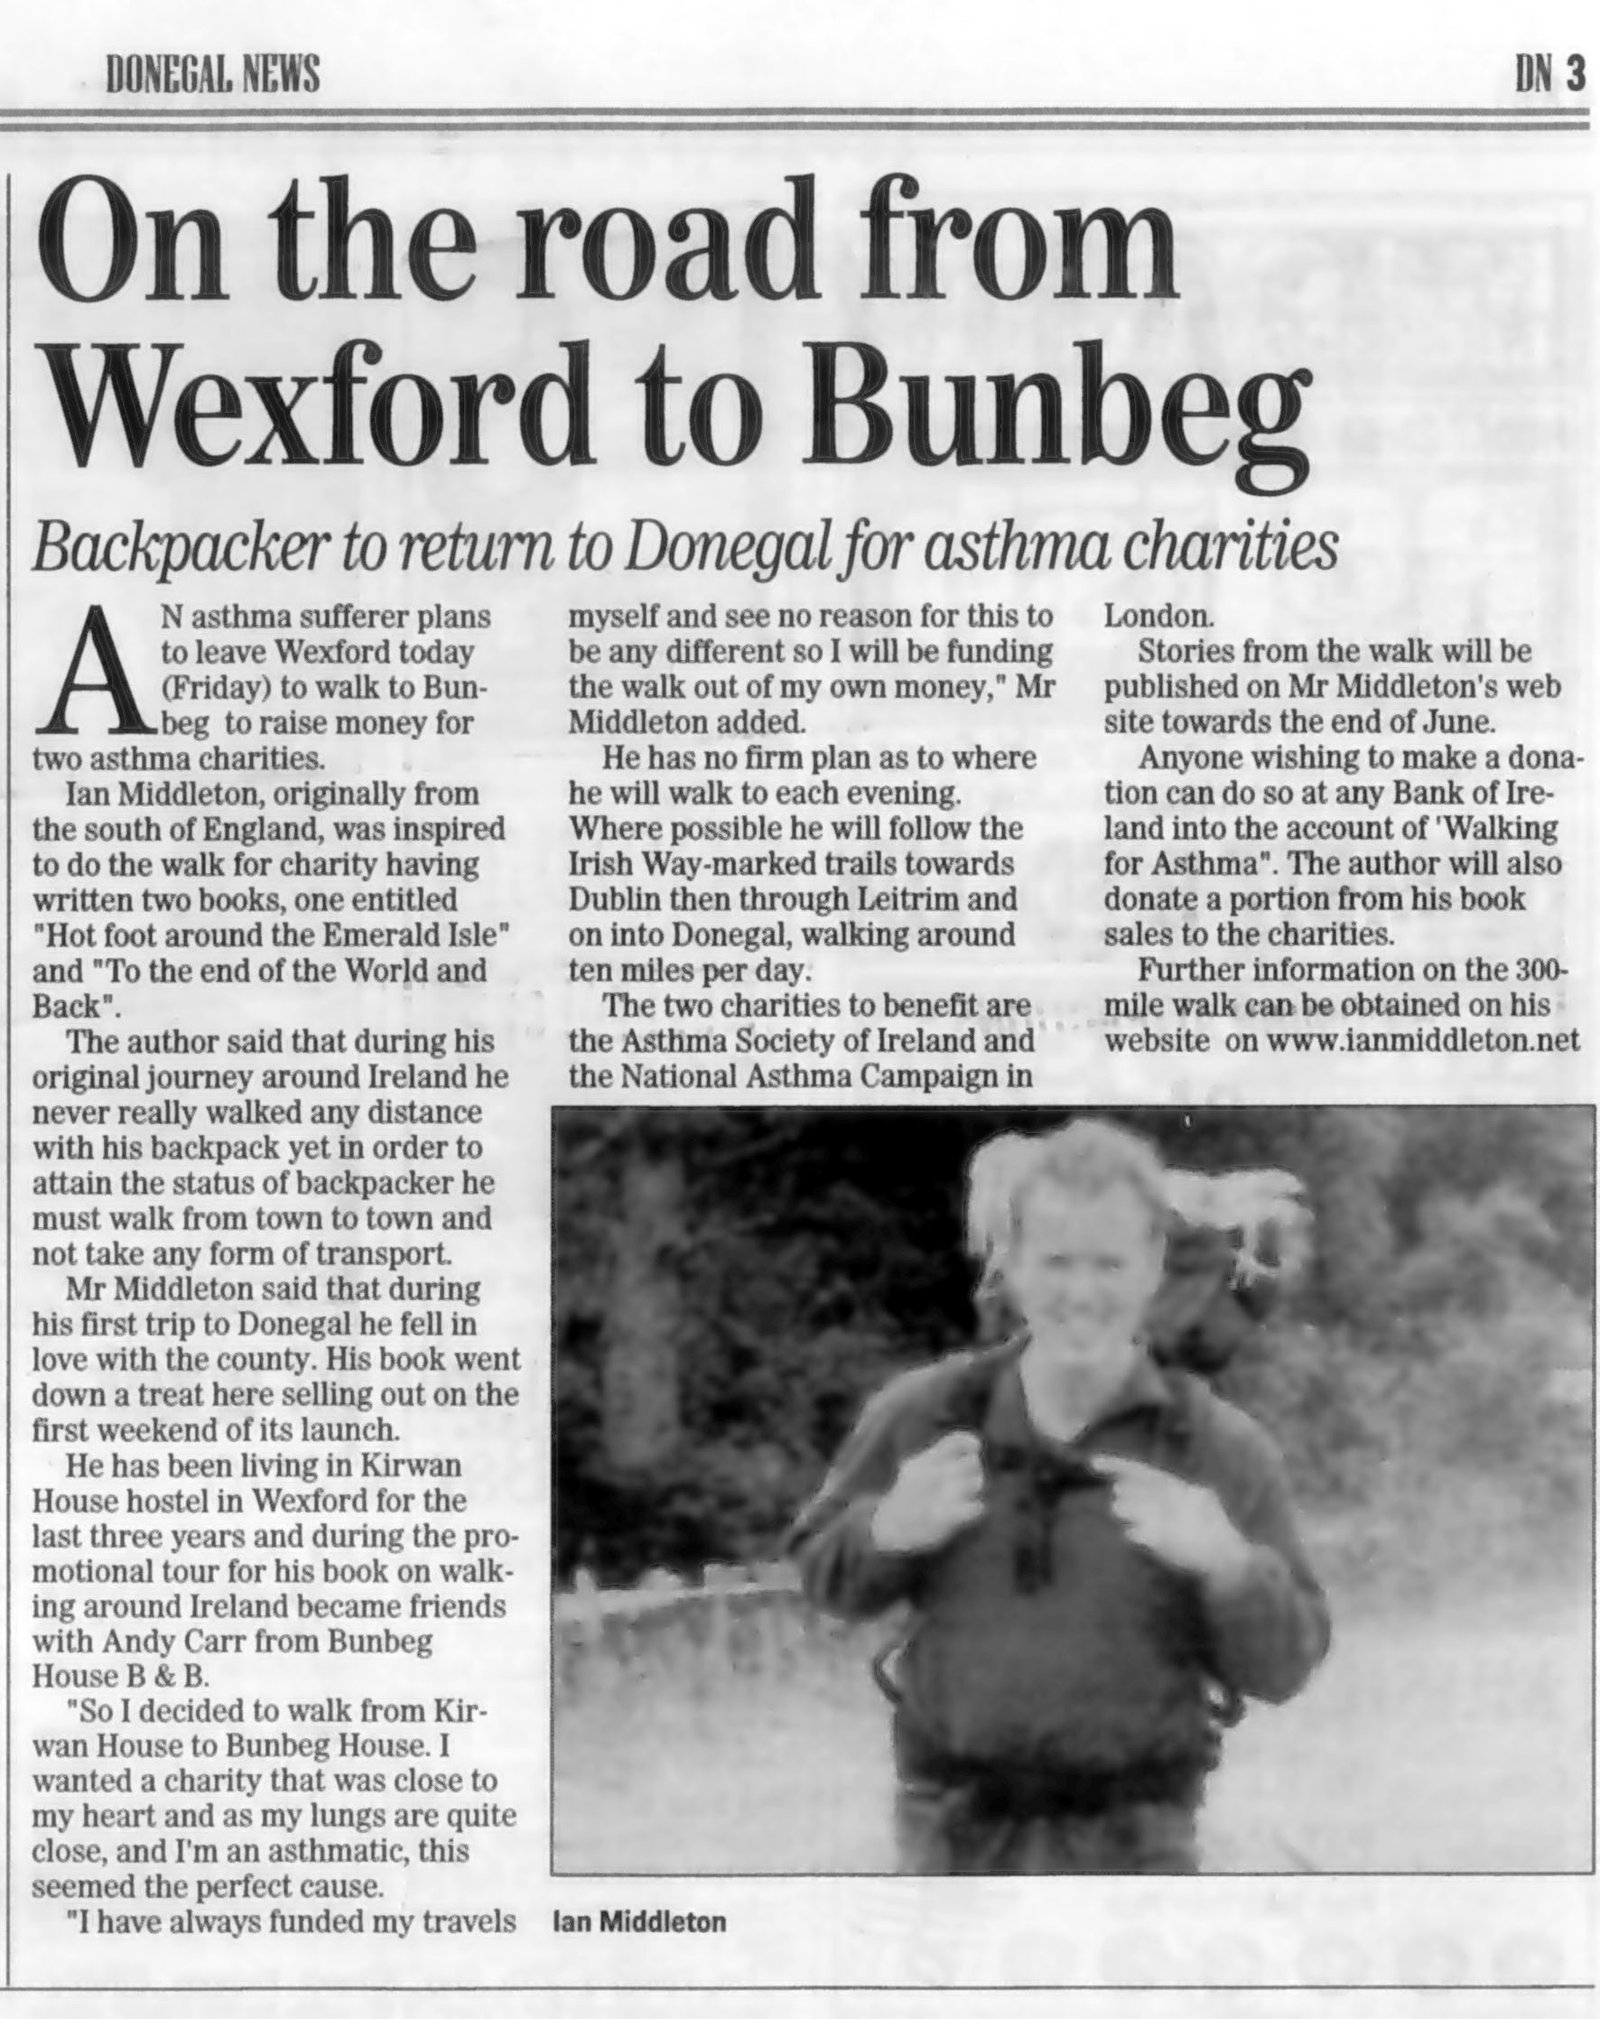 Article in the Donegal News about Ian Middleton's walk across Ireland for charity.